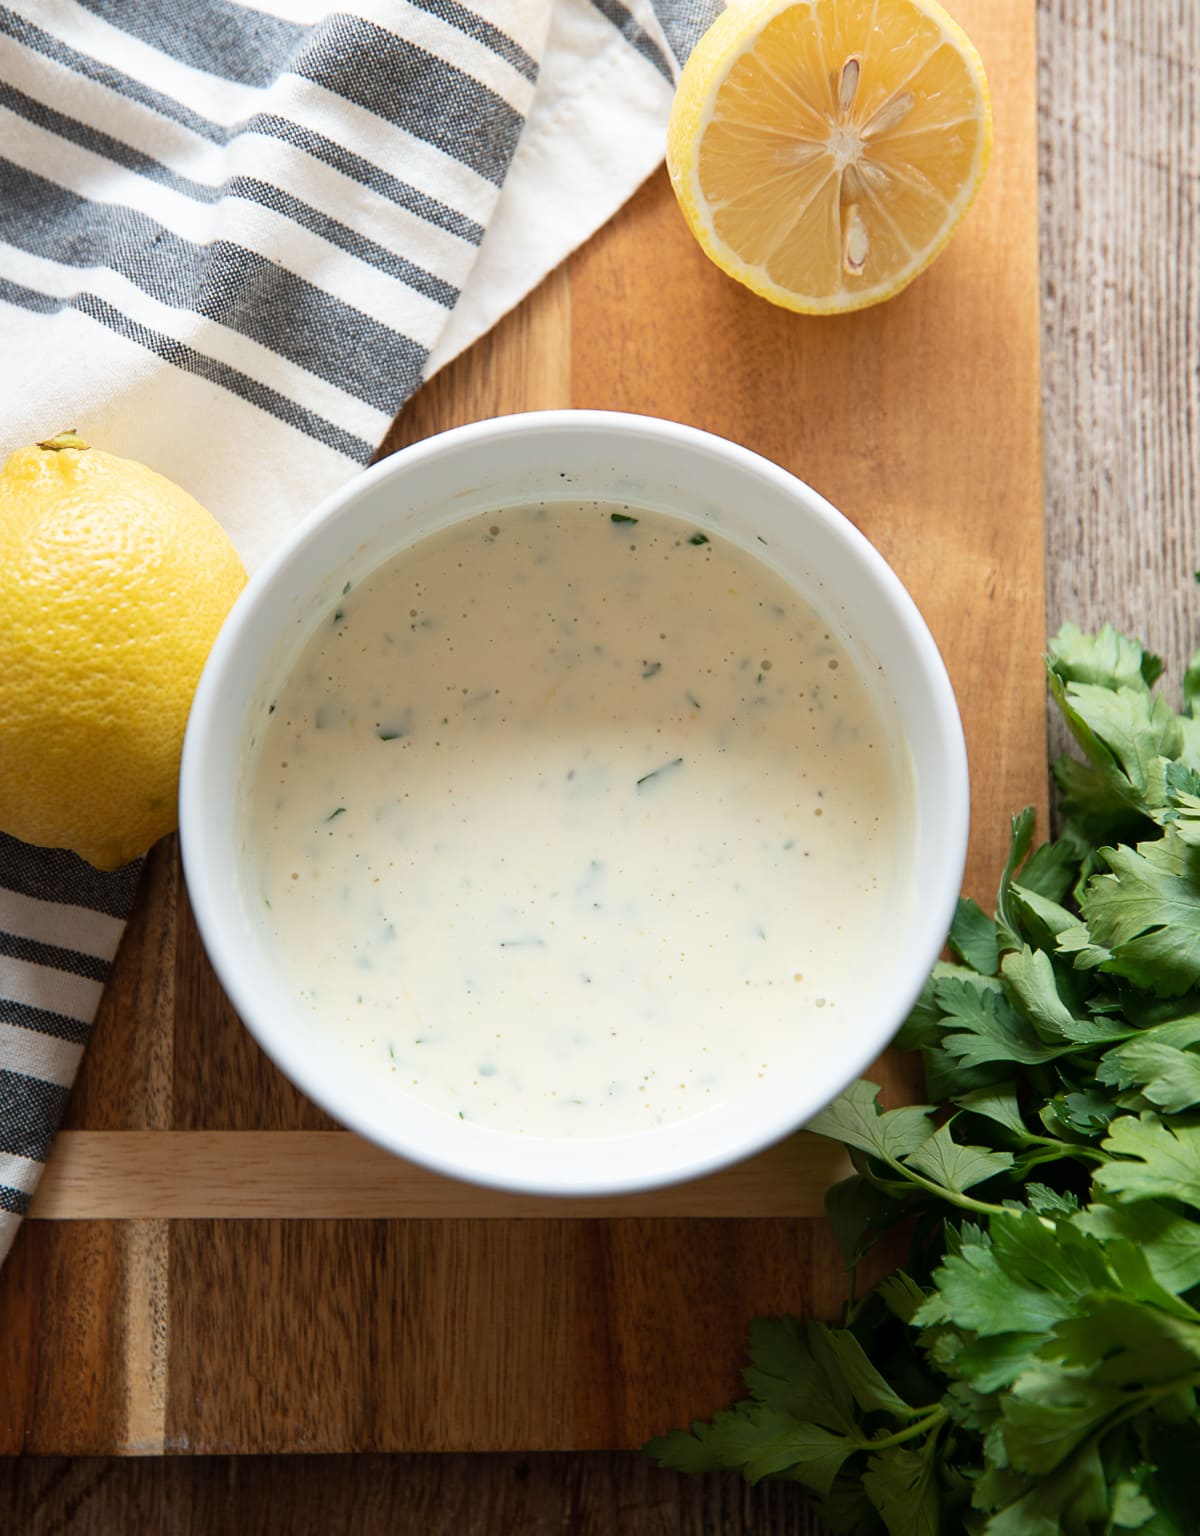 white bowl of lemon mayonnaise sauce with parsley, brown cutting board, blue and whits striped napkin , lemons